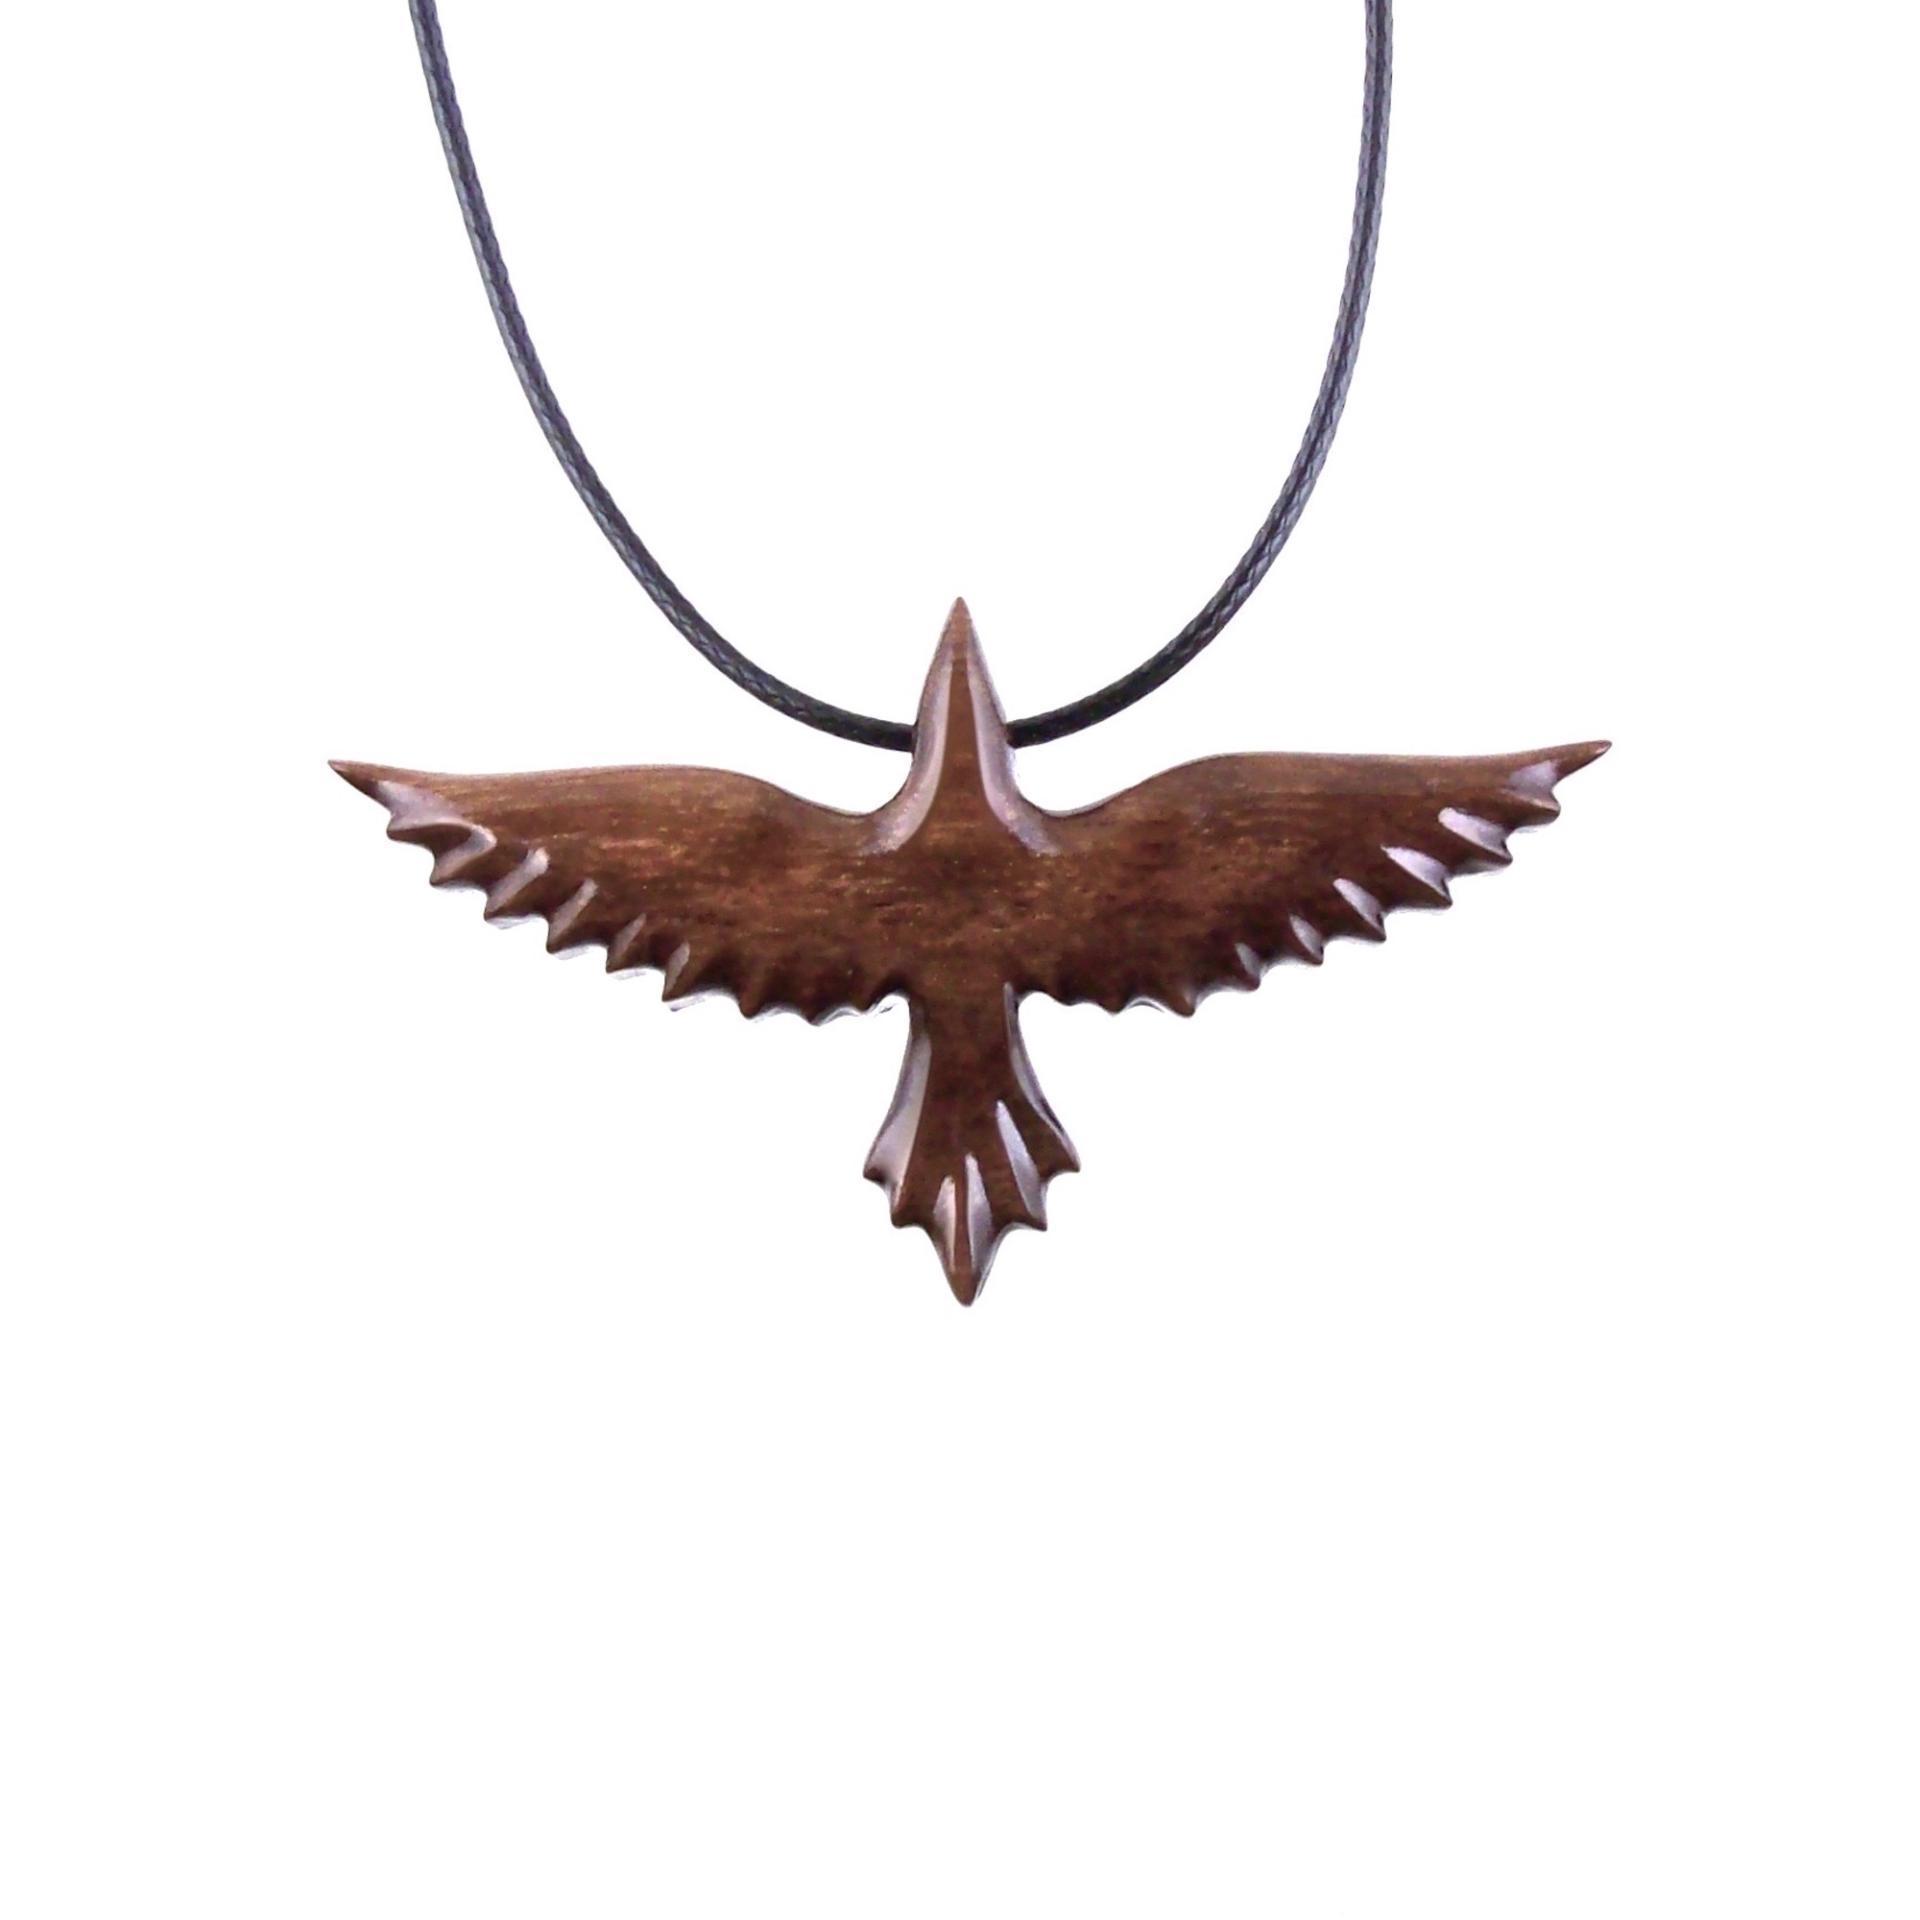 Flying Raven Necklace, Hand Carved Wooden Crow Pendant, Totem Wood Bird Jewelry for Men or Women, One of a Kind Gift for Him Her